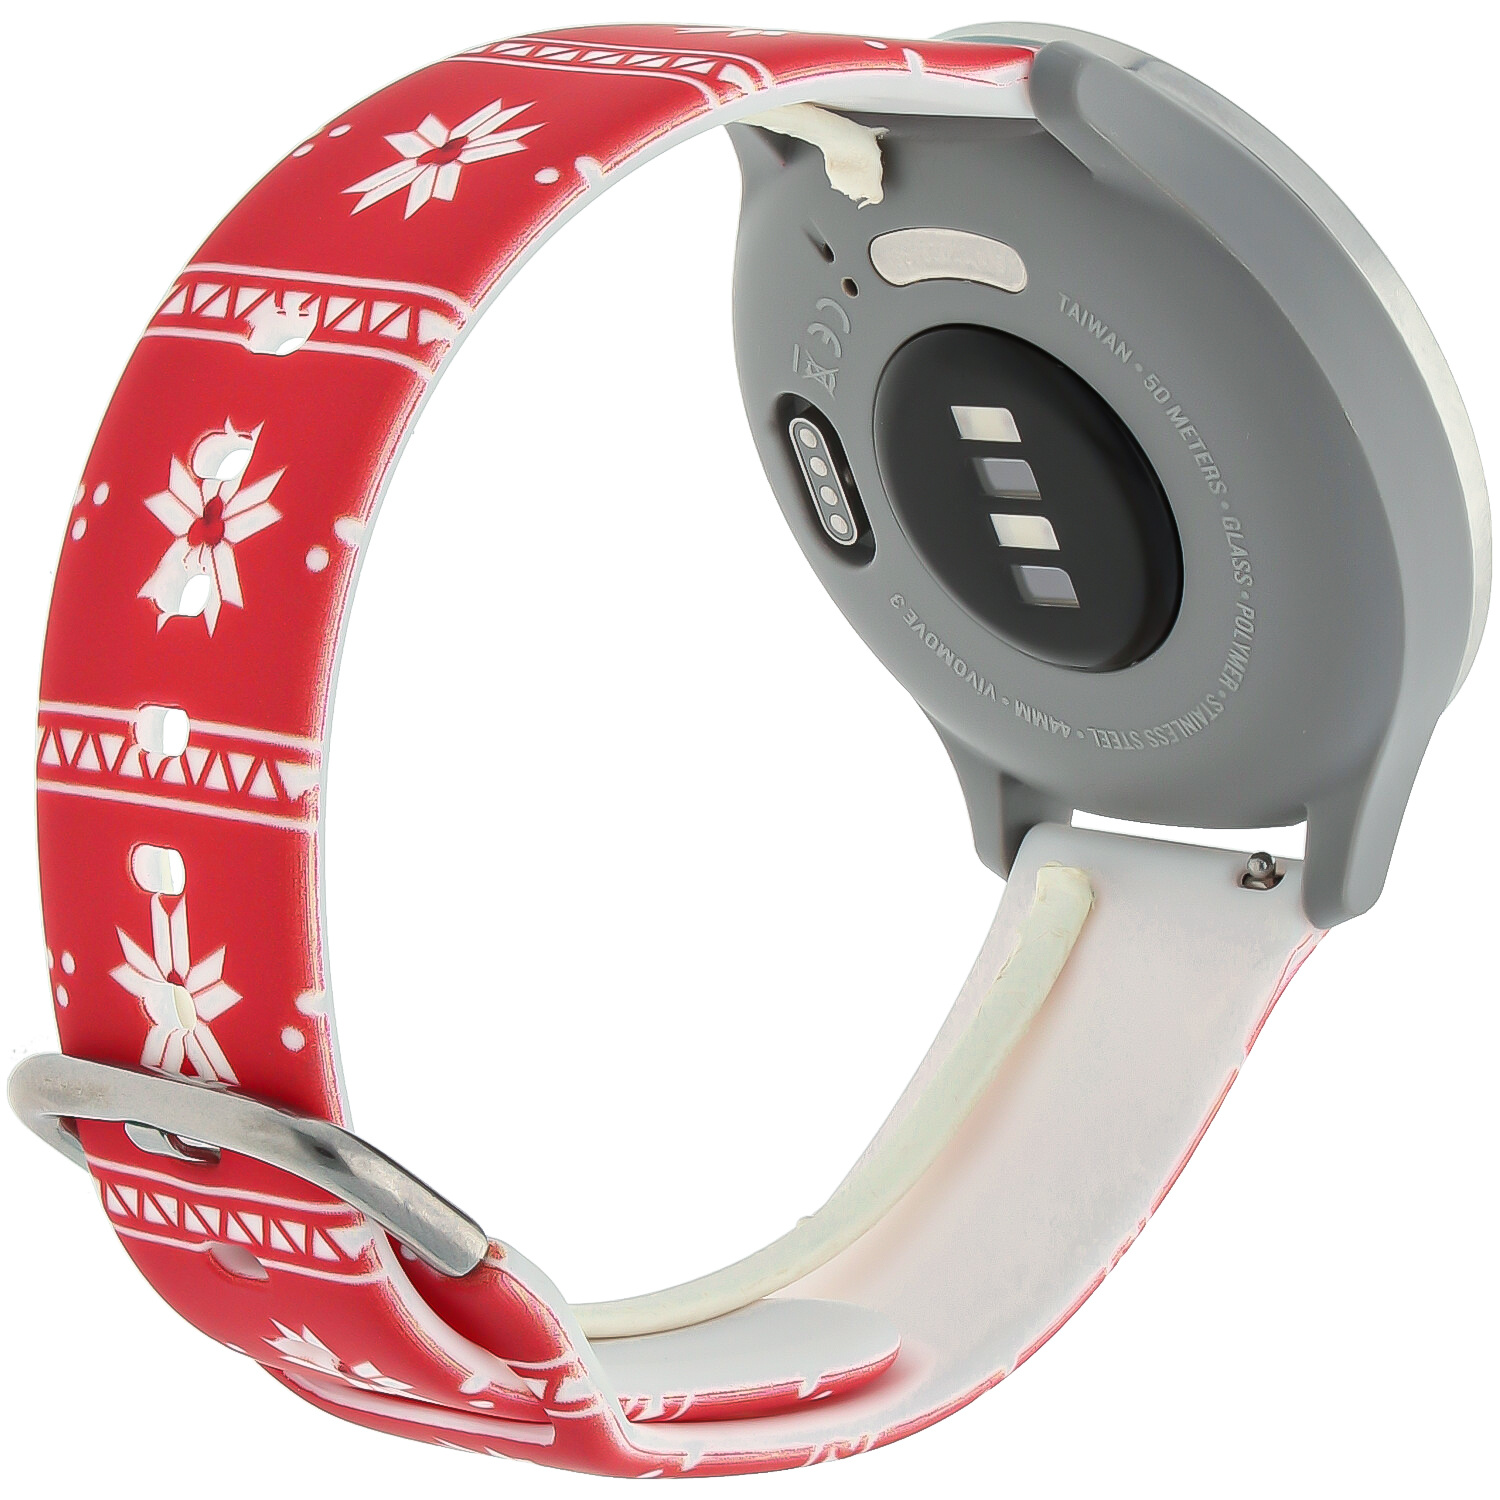 Samsung Galaxy Watch print sport band - kerst kerstster rood